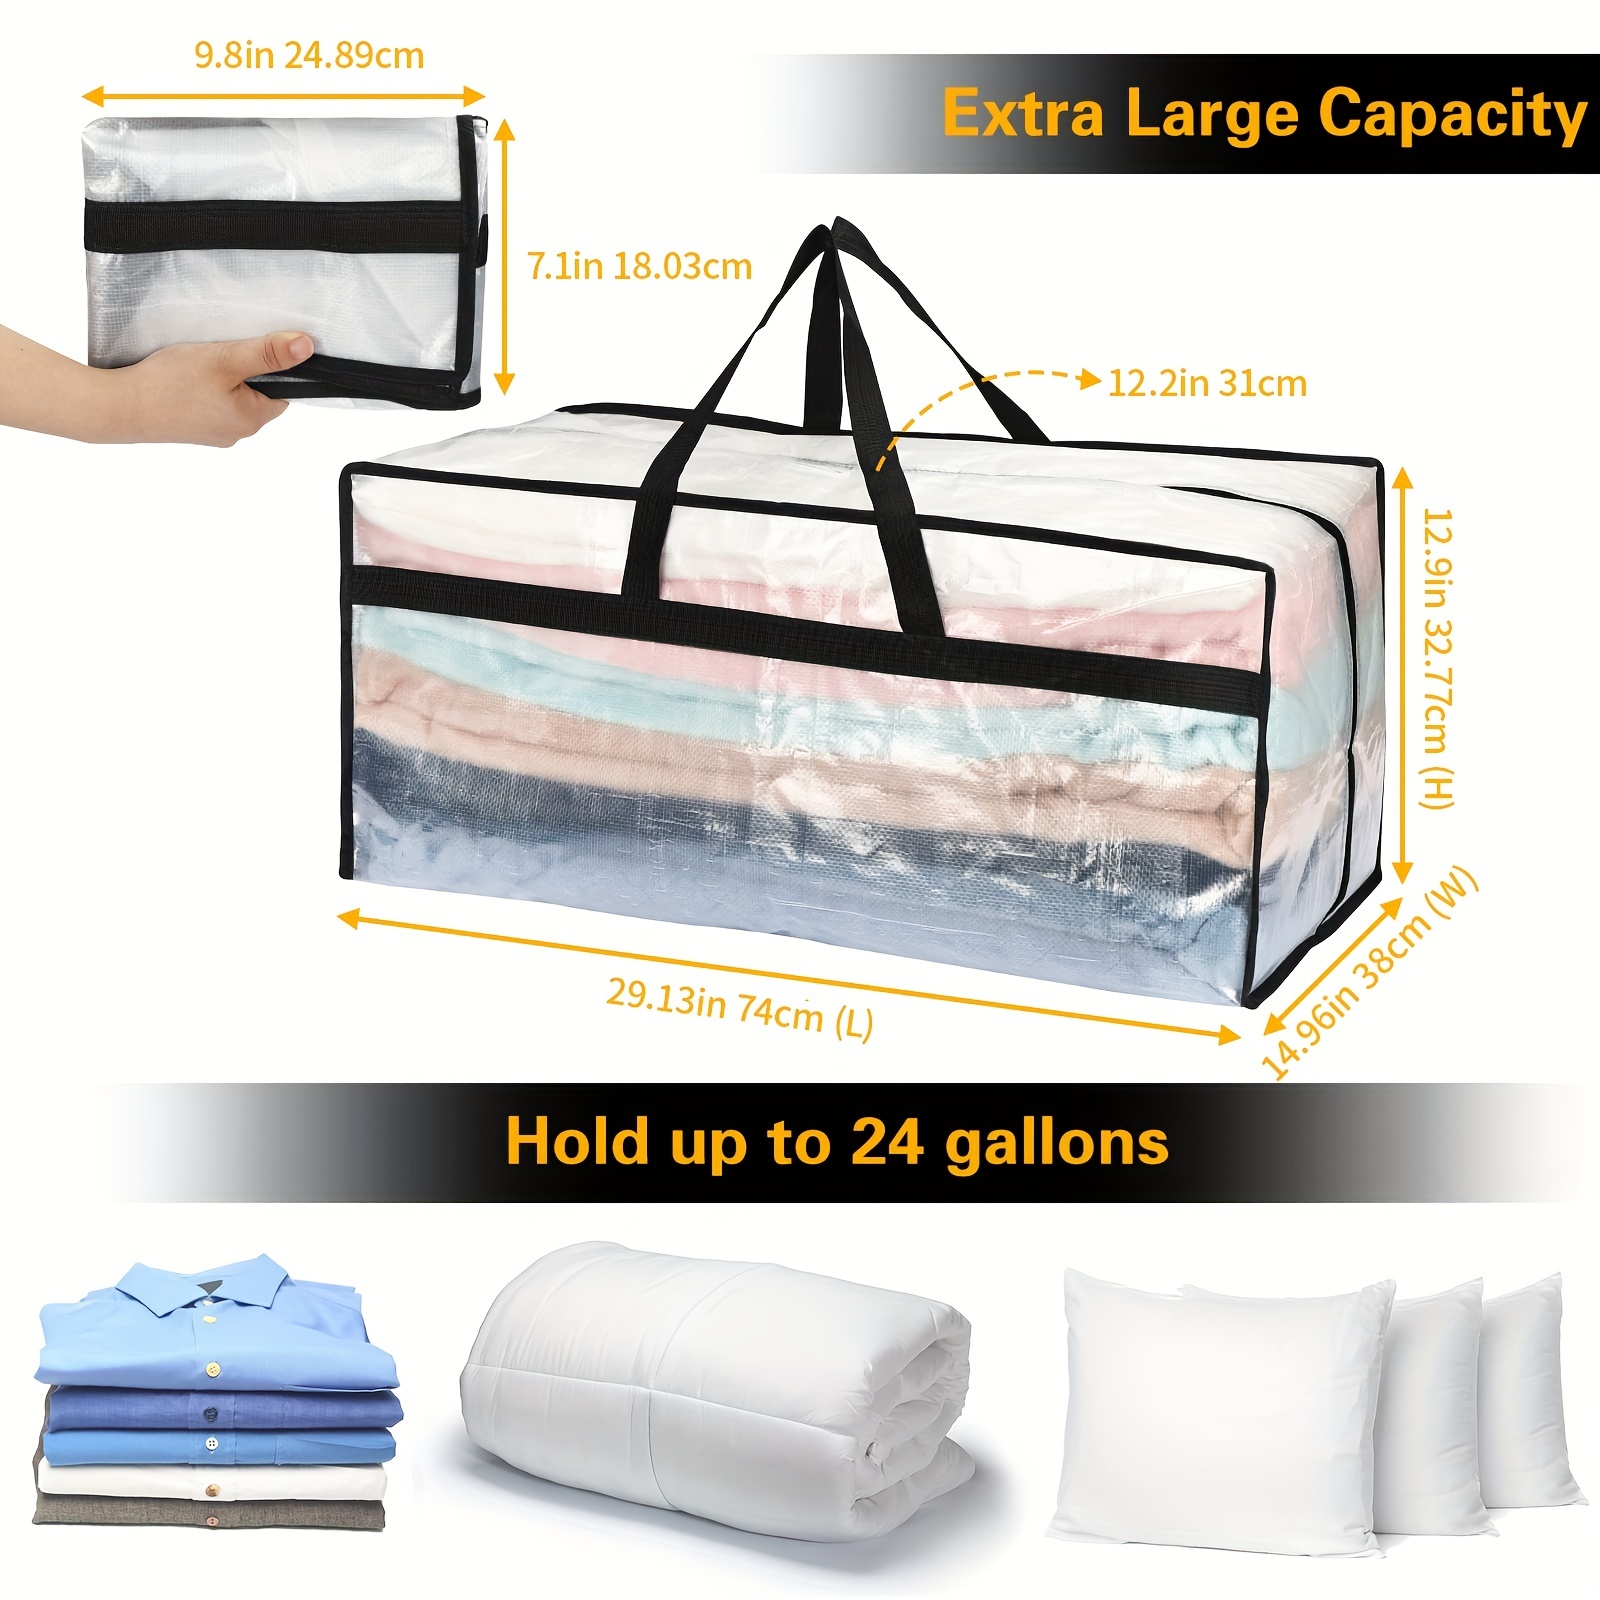  Clothing Storage Bags with Zipper - 4 Pack of Heavy Duty Moving  Bags Extra Large - Dorm Storage Moving Tote Bag - Packing Bags for Moving  Dorm Room Essentials, Pillows, Bedding